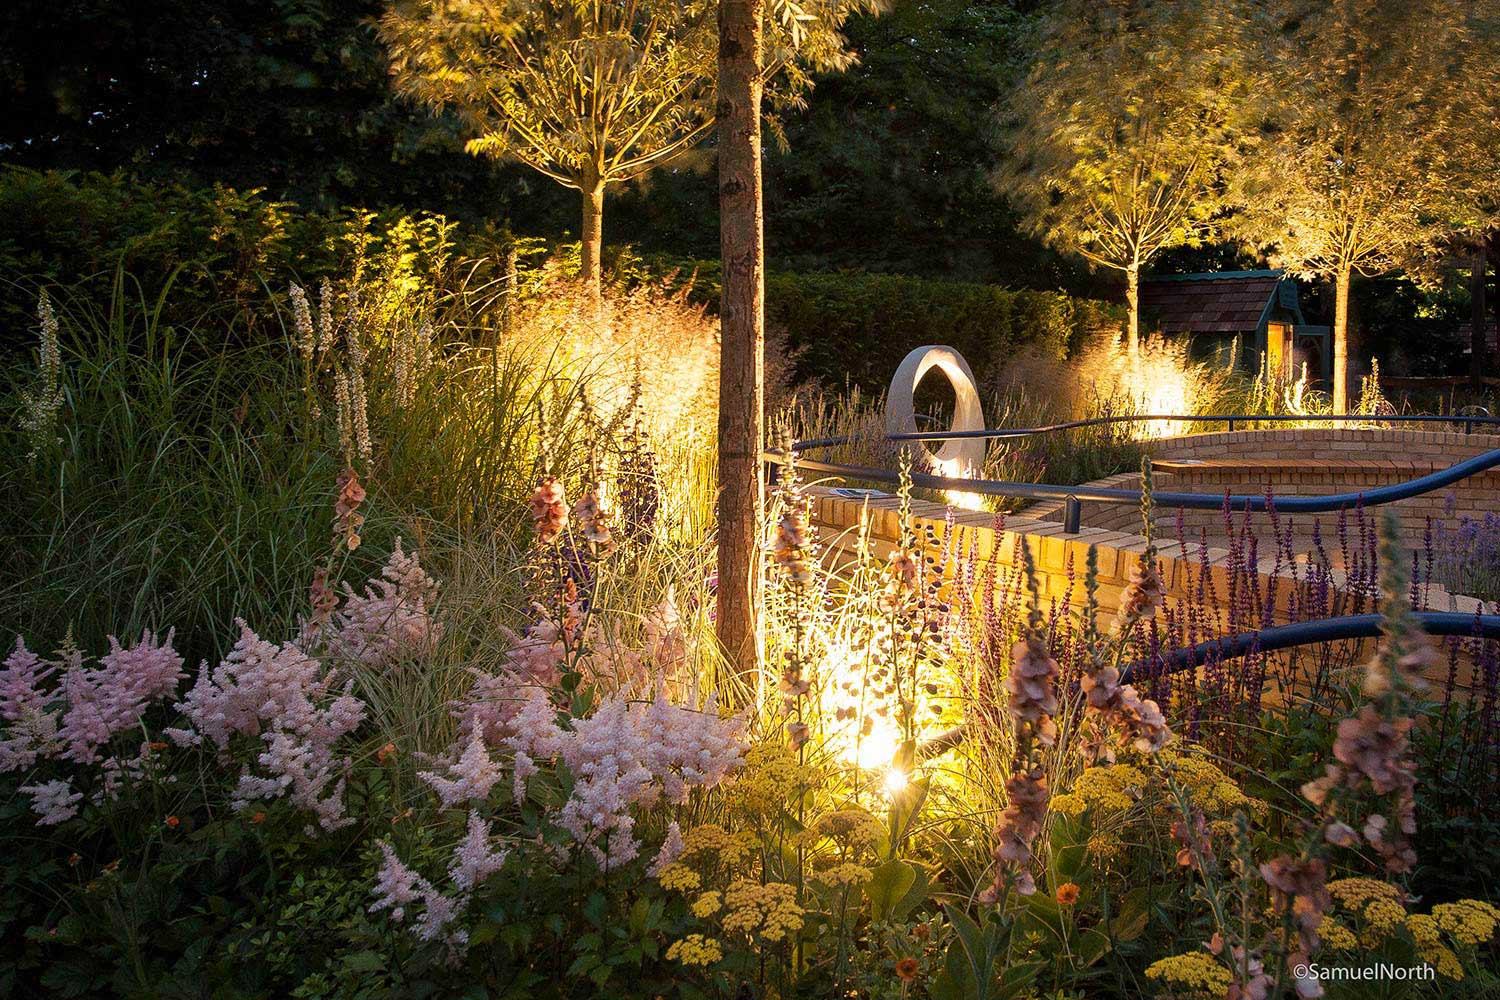 Rae Wilkinson Show Garden with evening lighting. Rae Wilkinson Garden and Landscape Design Surrey, Sussex, Hampshire, London, South-East England